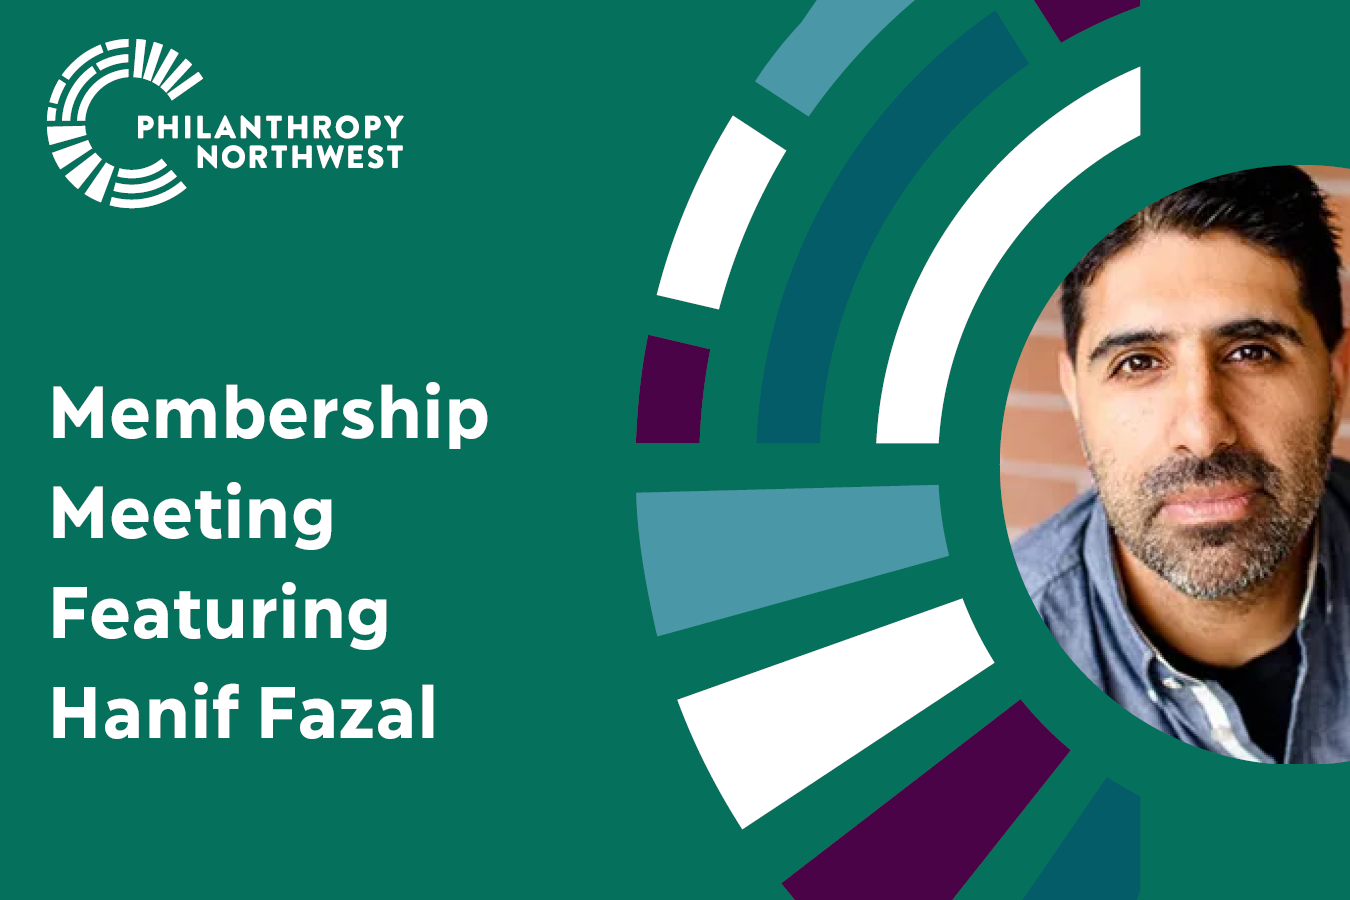 Pine green event banner that says "Membership Meeting Featuring Hanif Fazal" and has a colorful half circle design on the side with a photo of Hanif Fazal